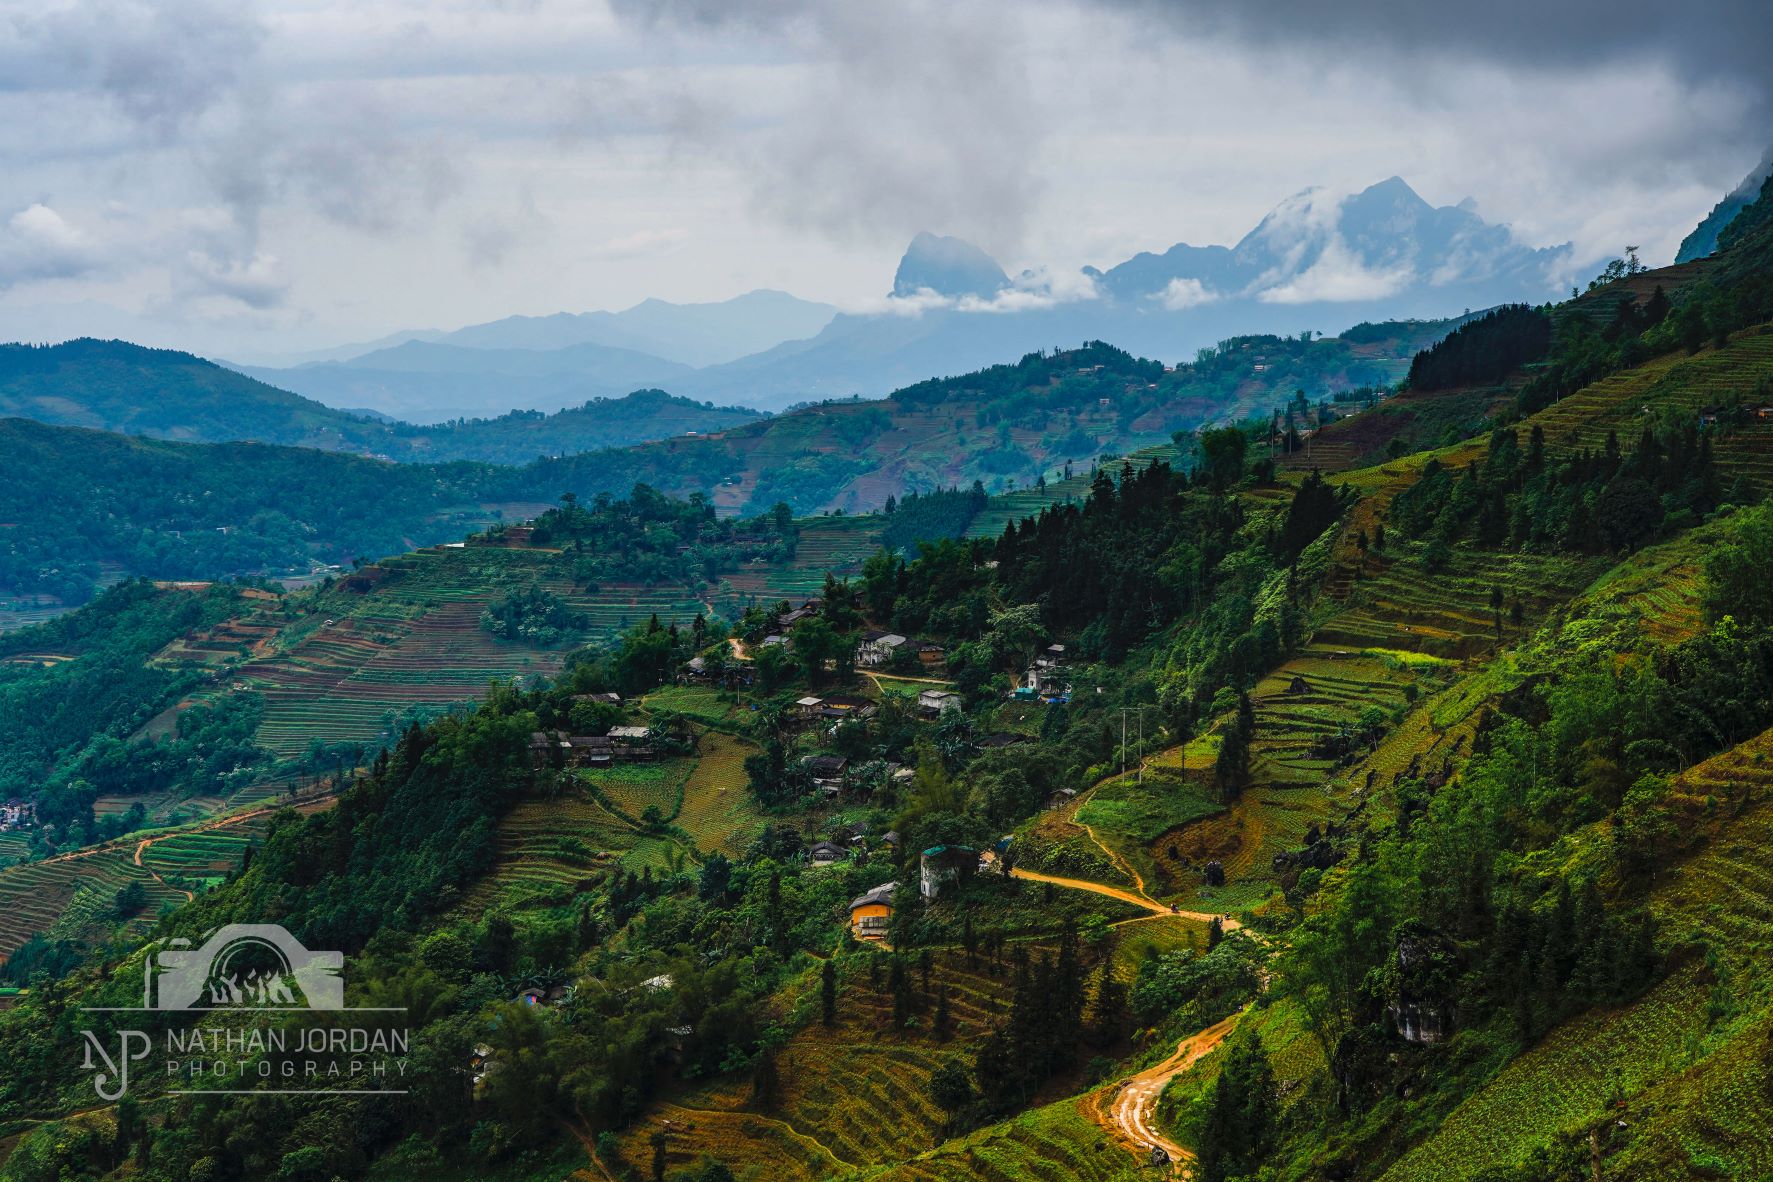 Mountains and jungle during misty weather at a Ha Giang Loop Wilderness Viewpoint nathan jordan photography